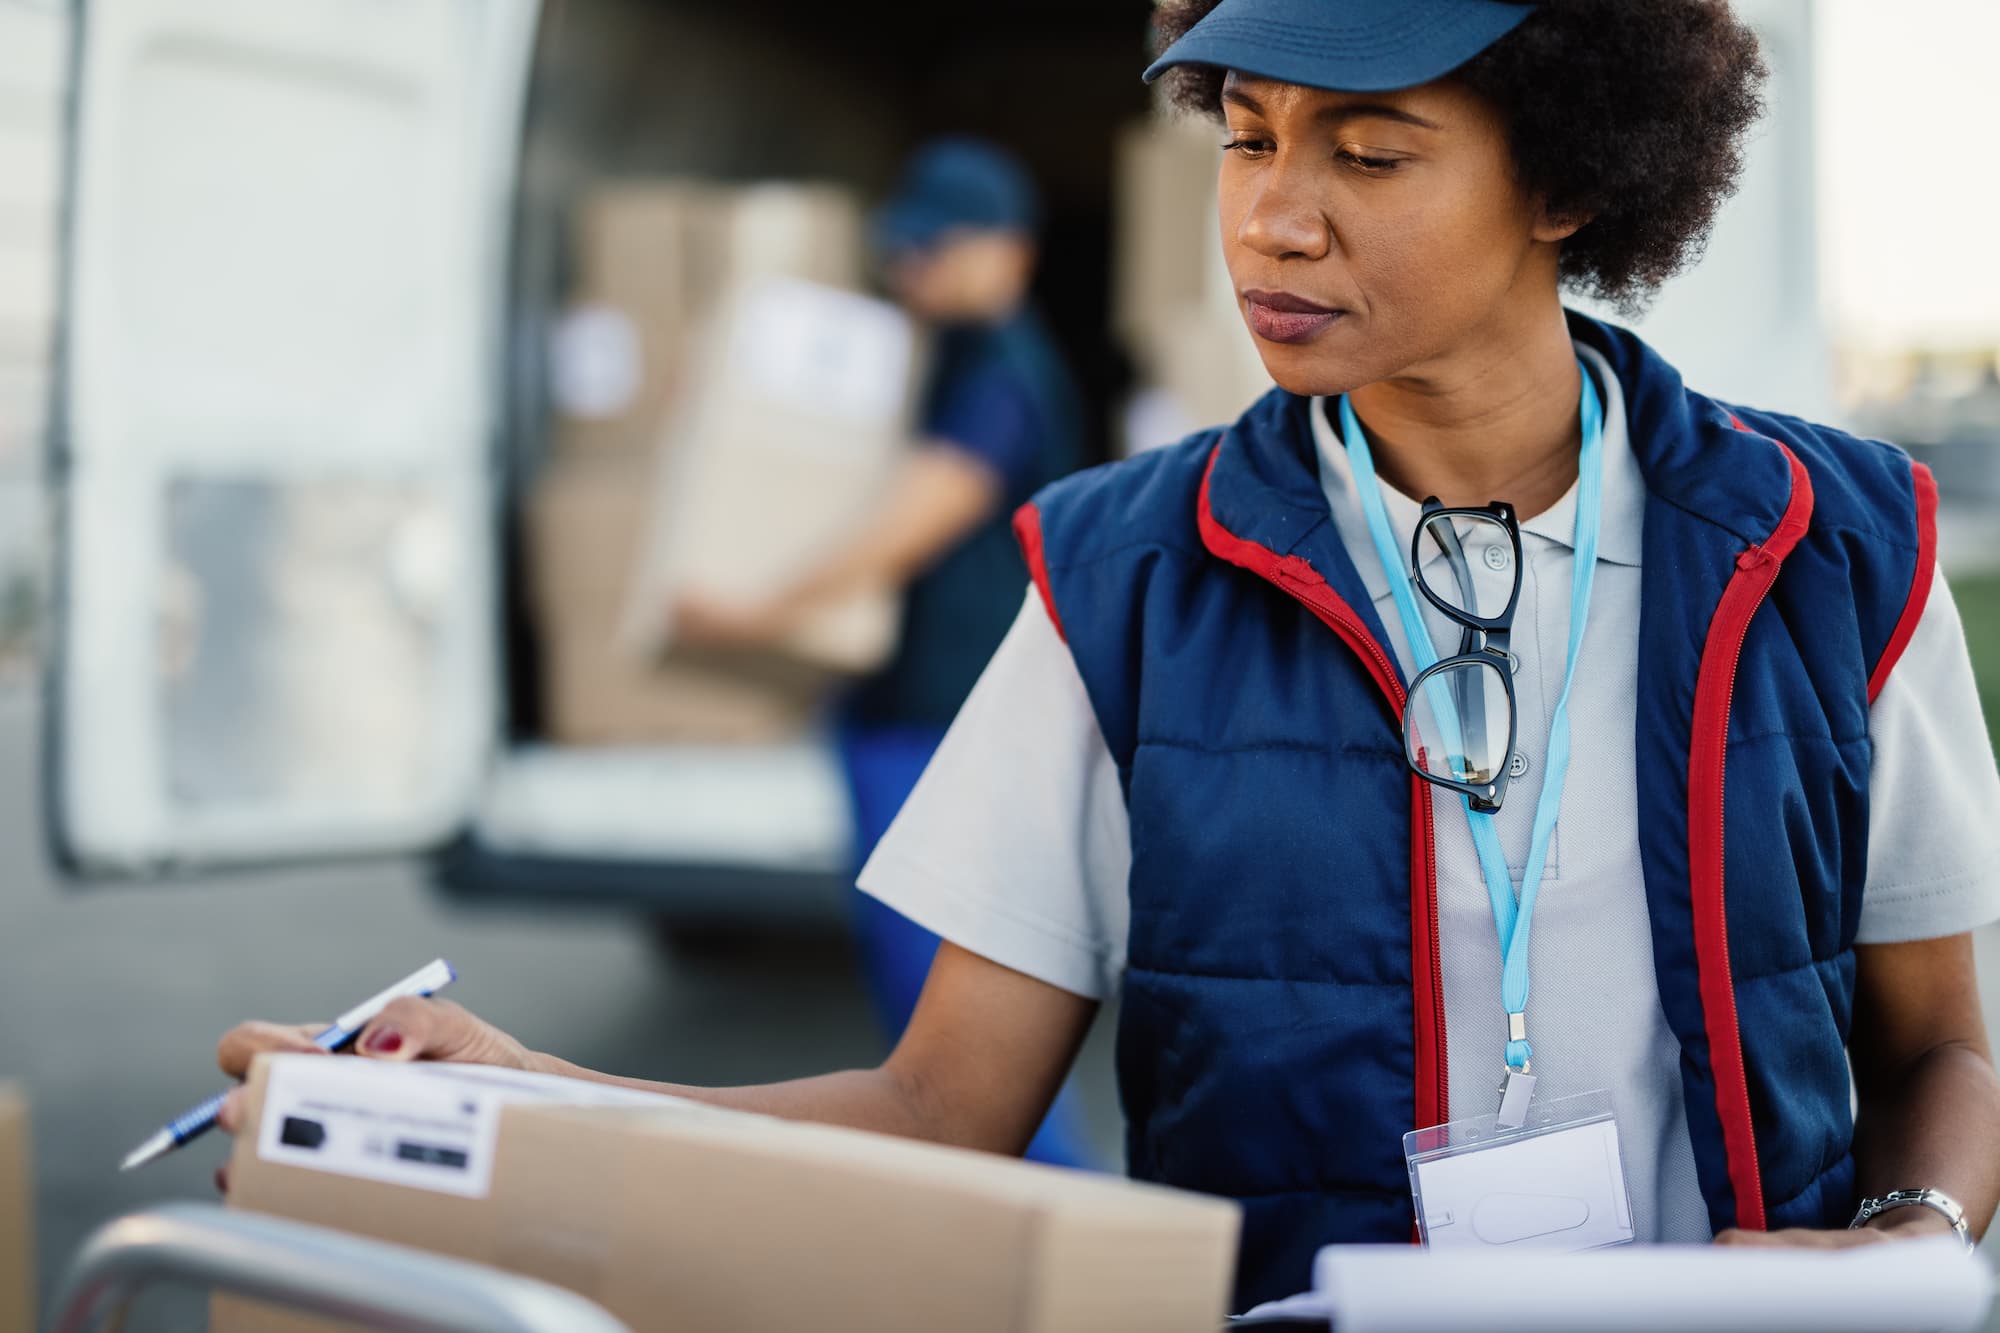 A postal worker inspects a package to verify the delivery address.